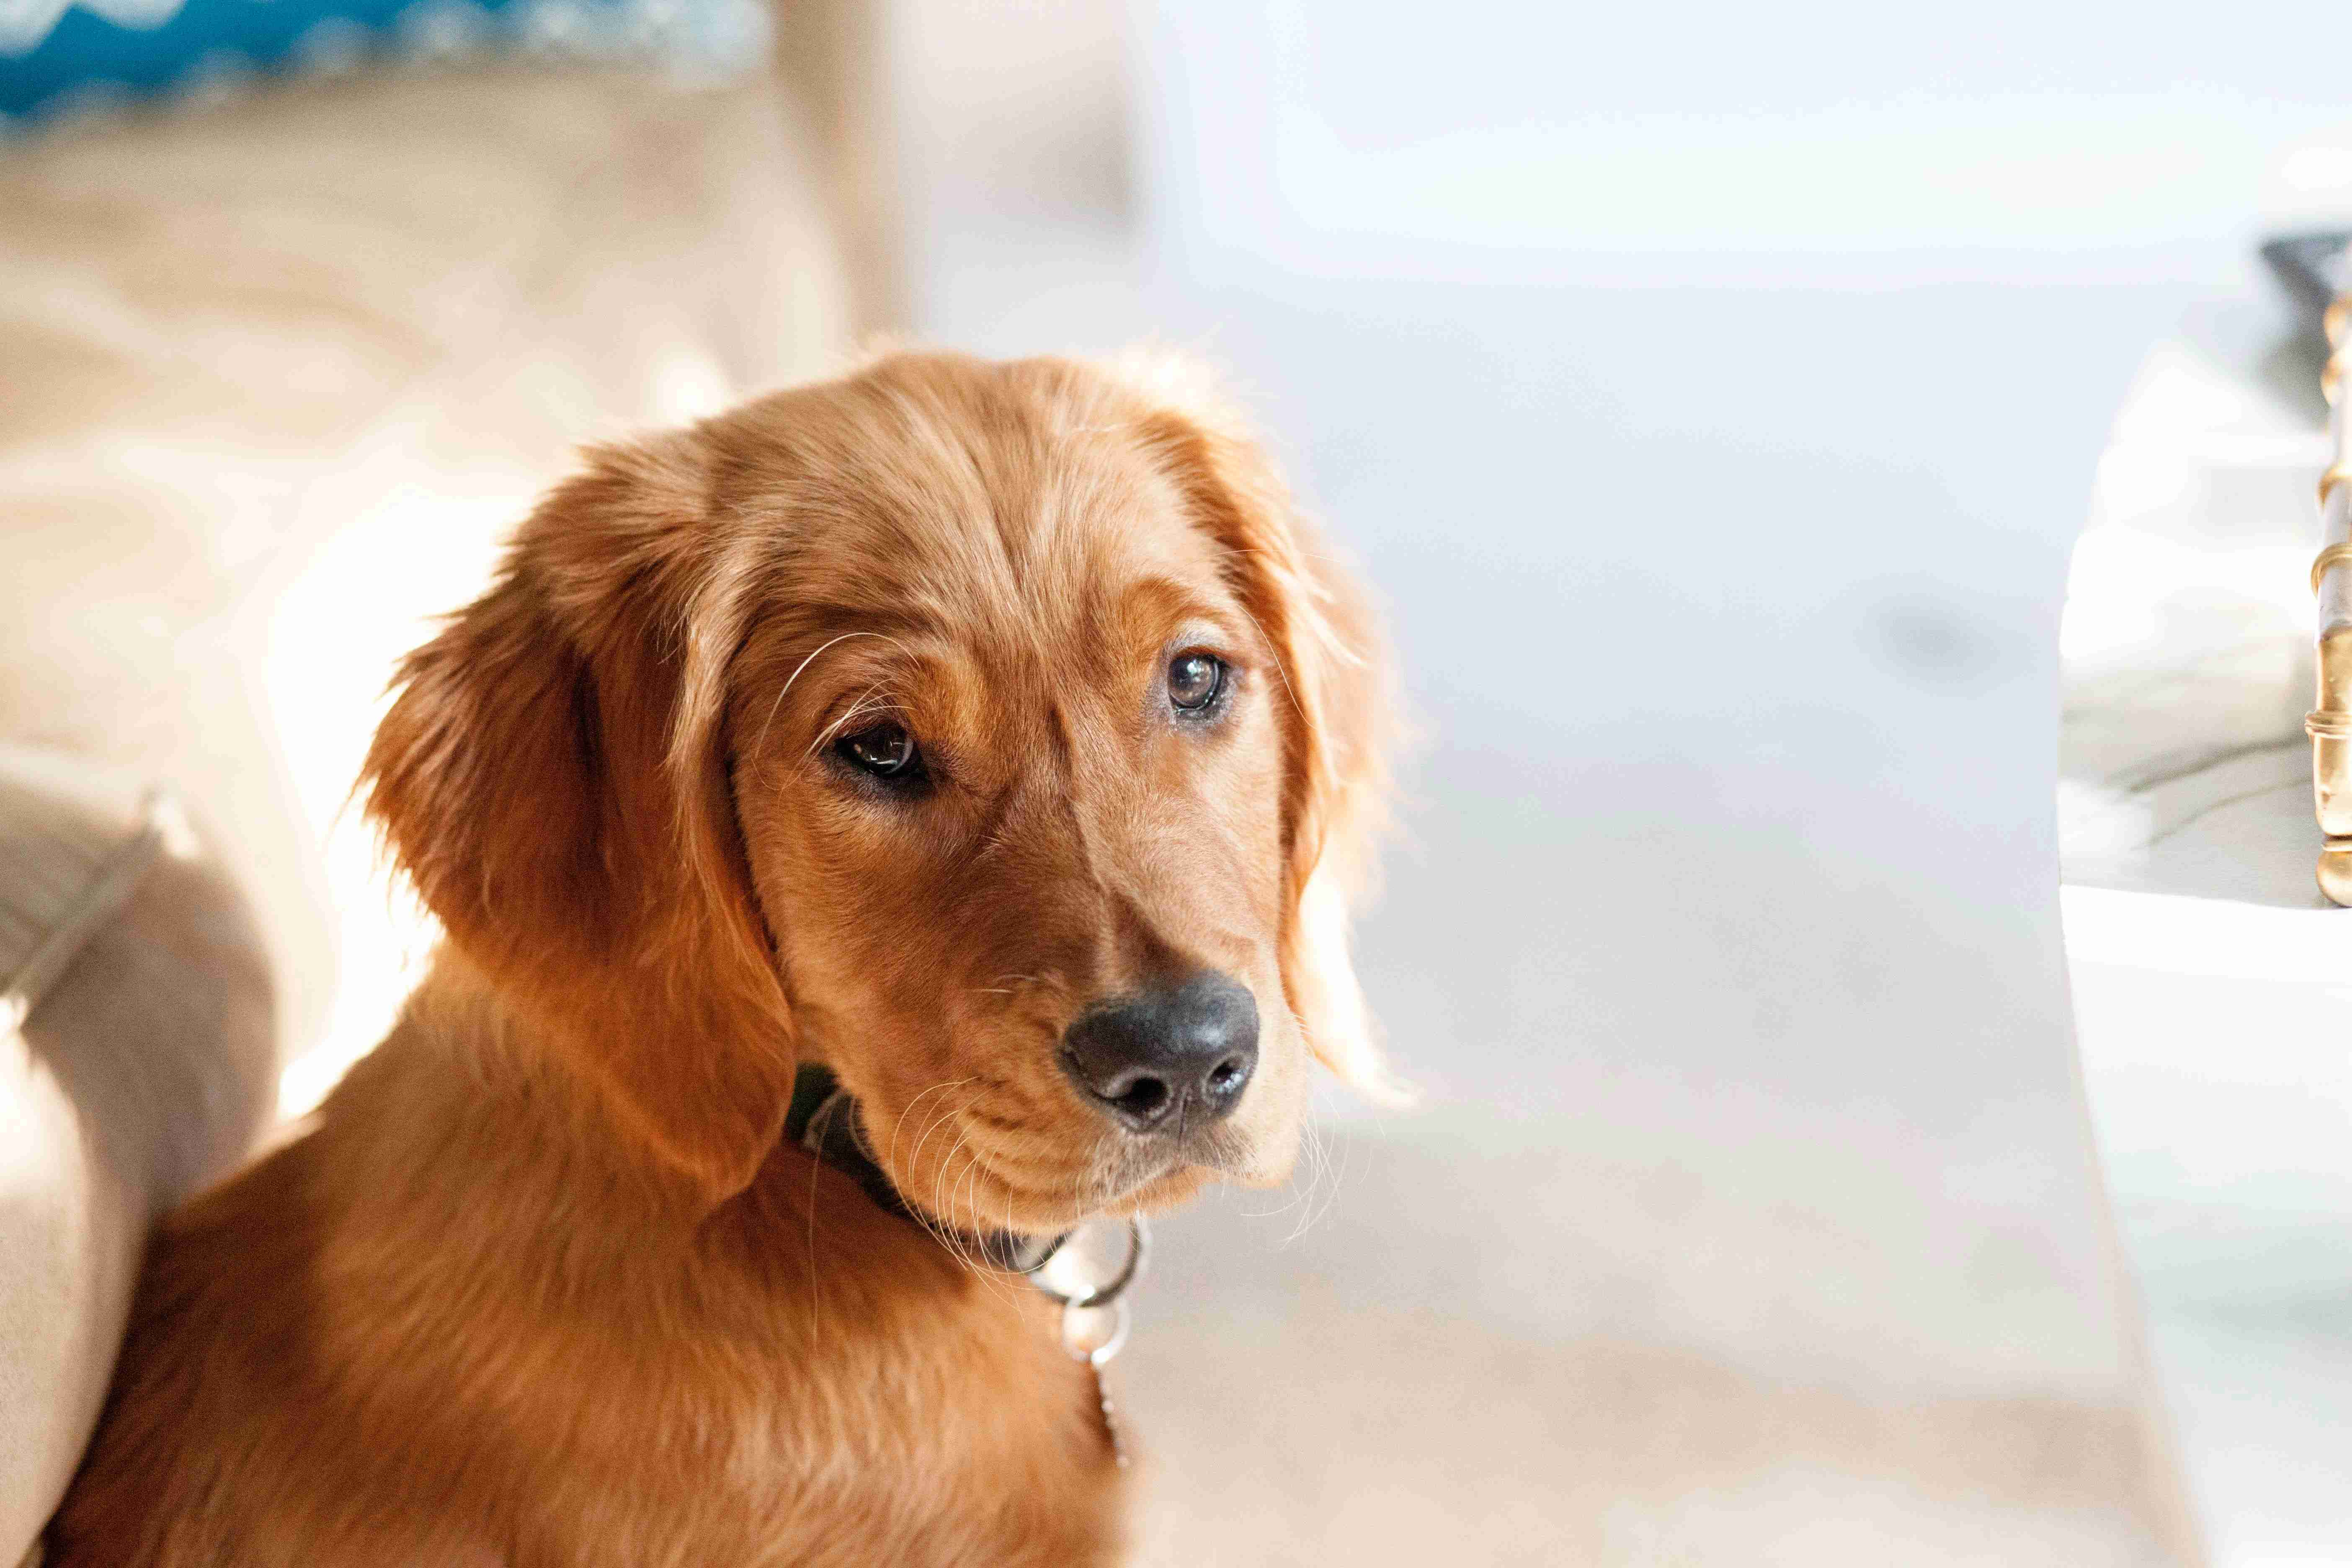 What are some common skin conditions that golden retrievers may develop?